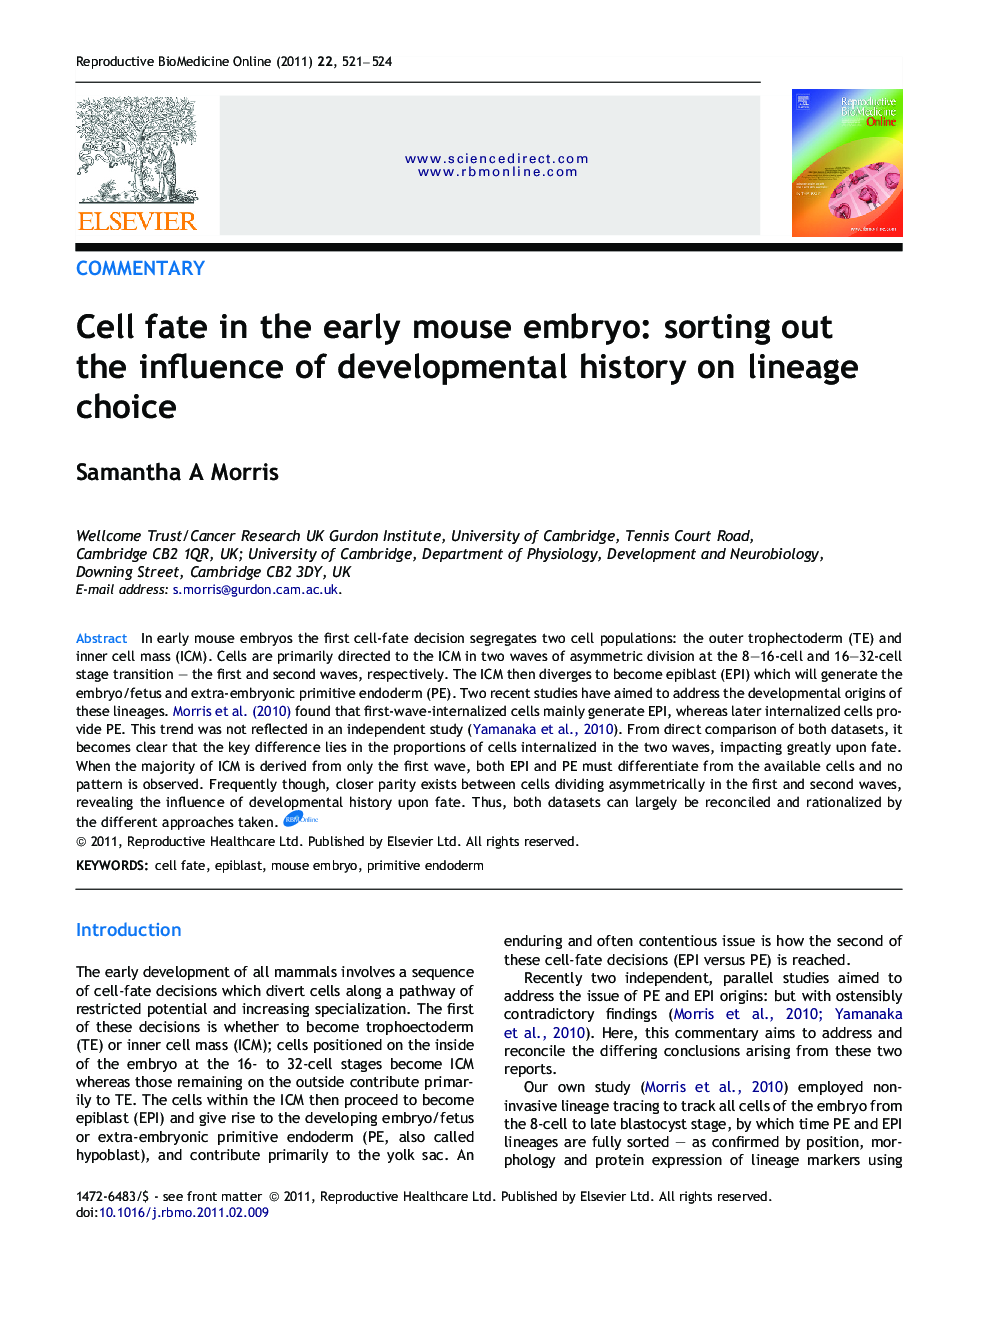 Cell fate in the early mouse embryo: sorting out the influence of developmental history on lineage choice